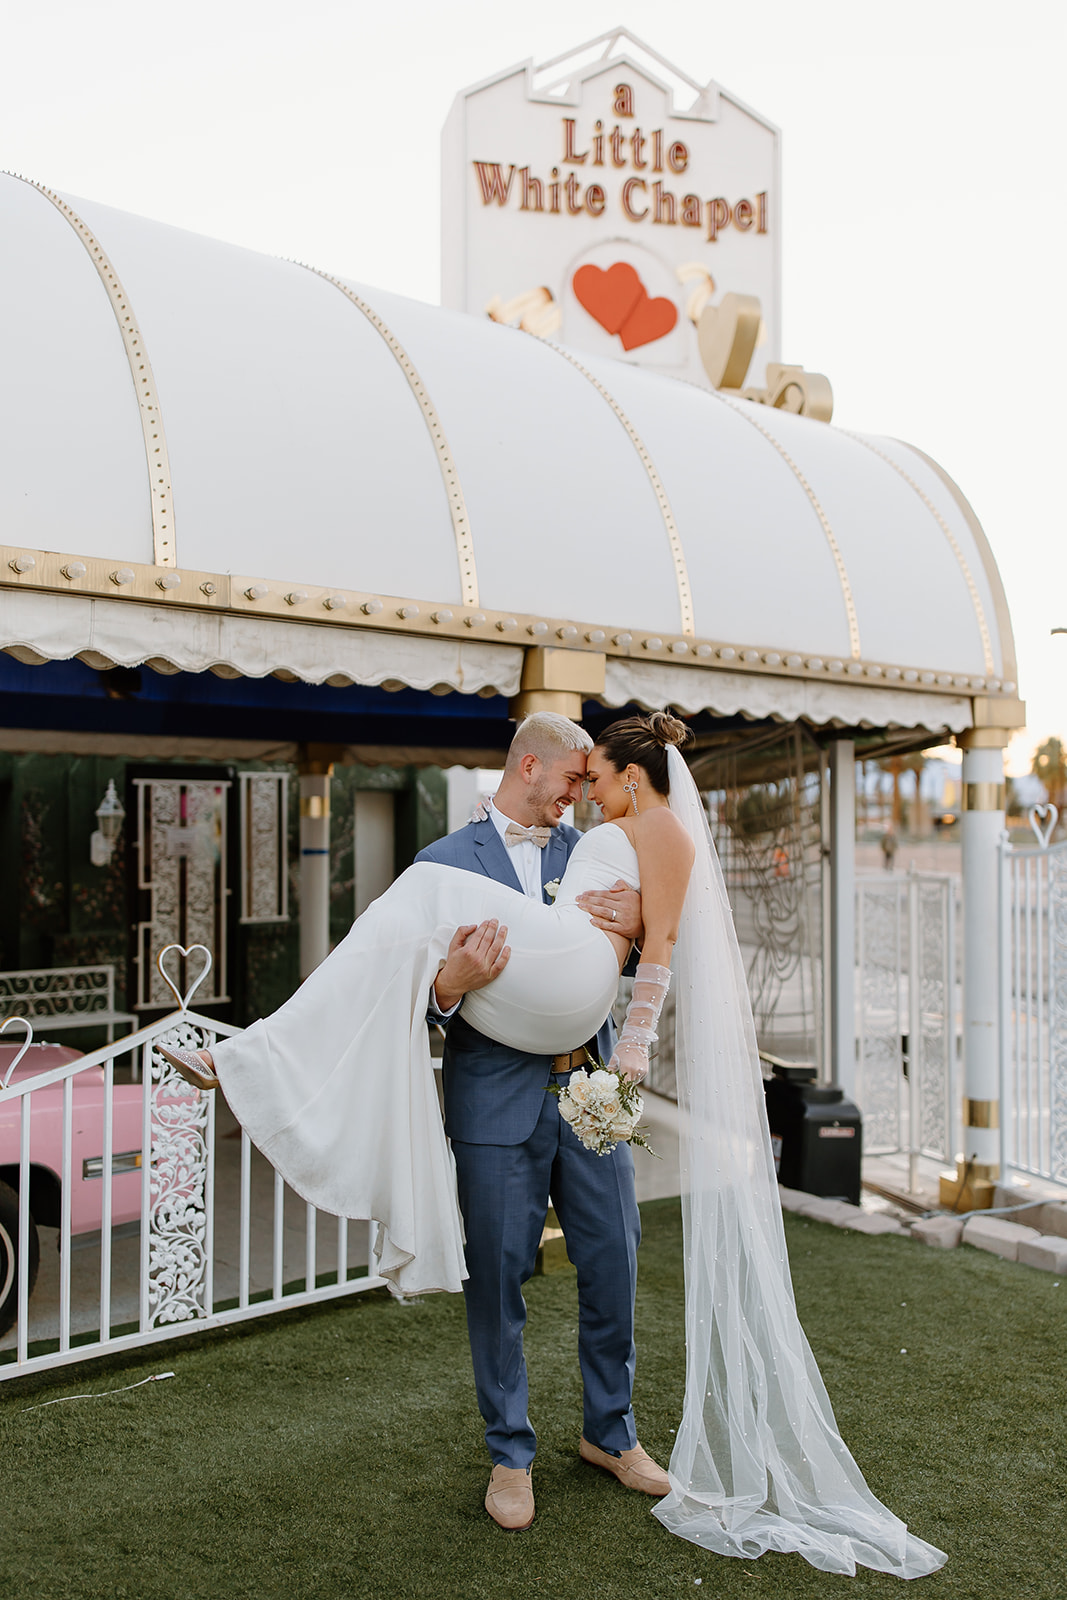 Groom holds his bride in front of the little white chapel sign